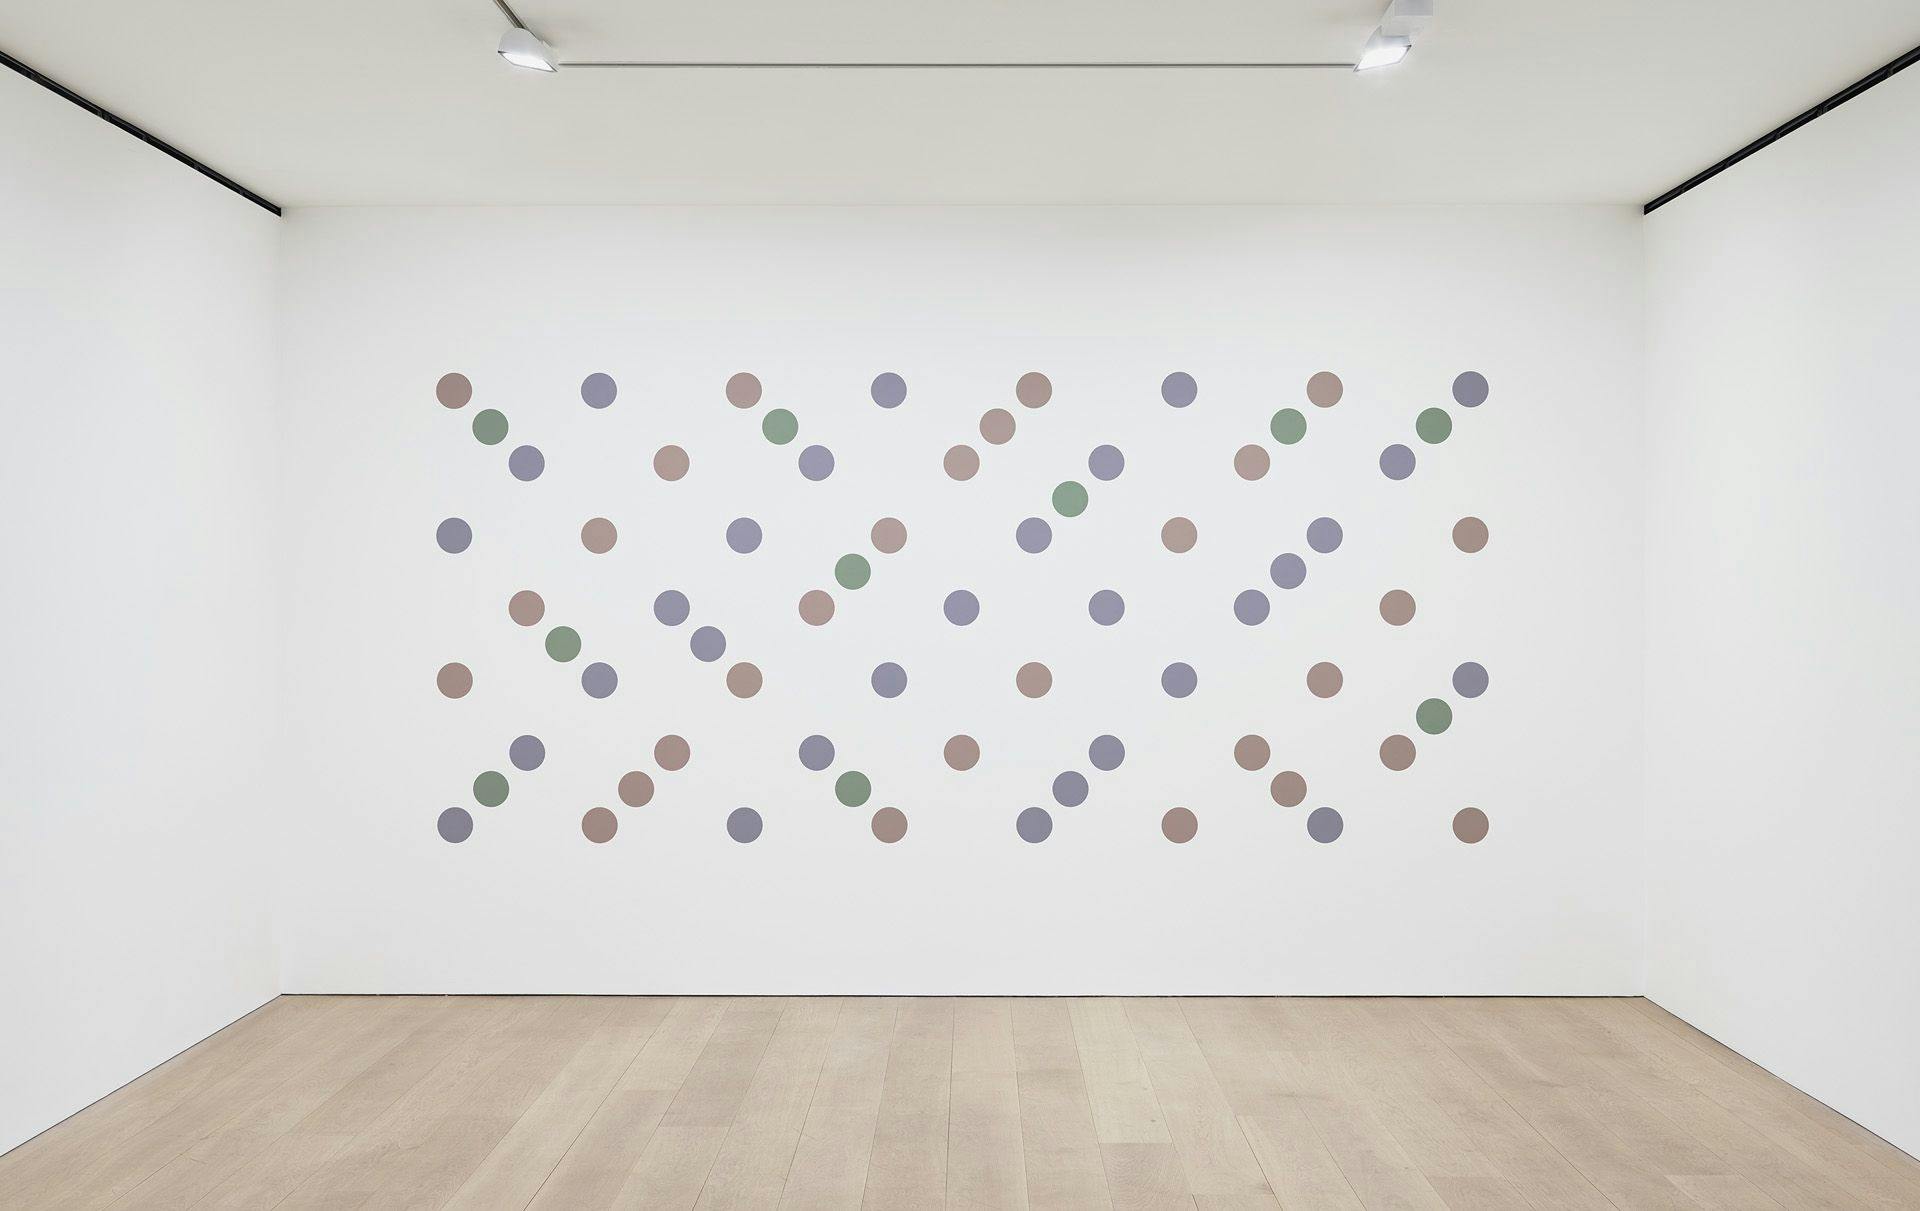 Installation view of the exhibition Bridget Riley: Recent Paintings, at David Zwirner in London, dated 2018.